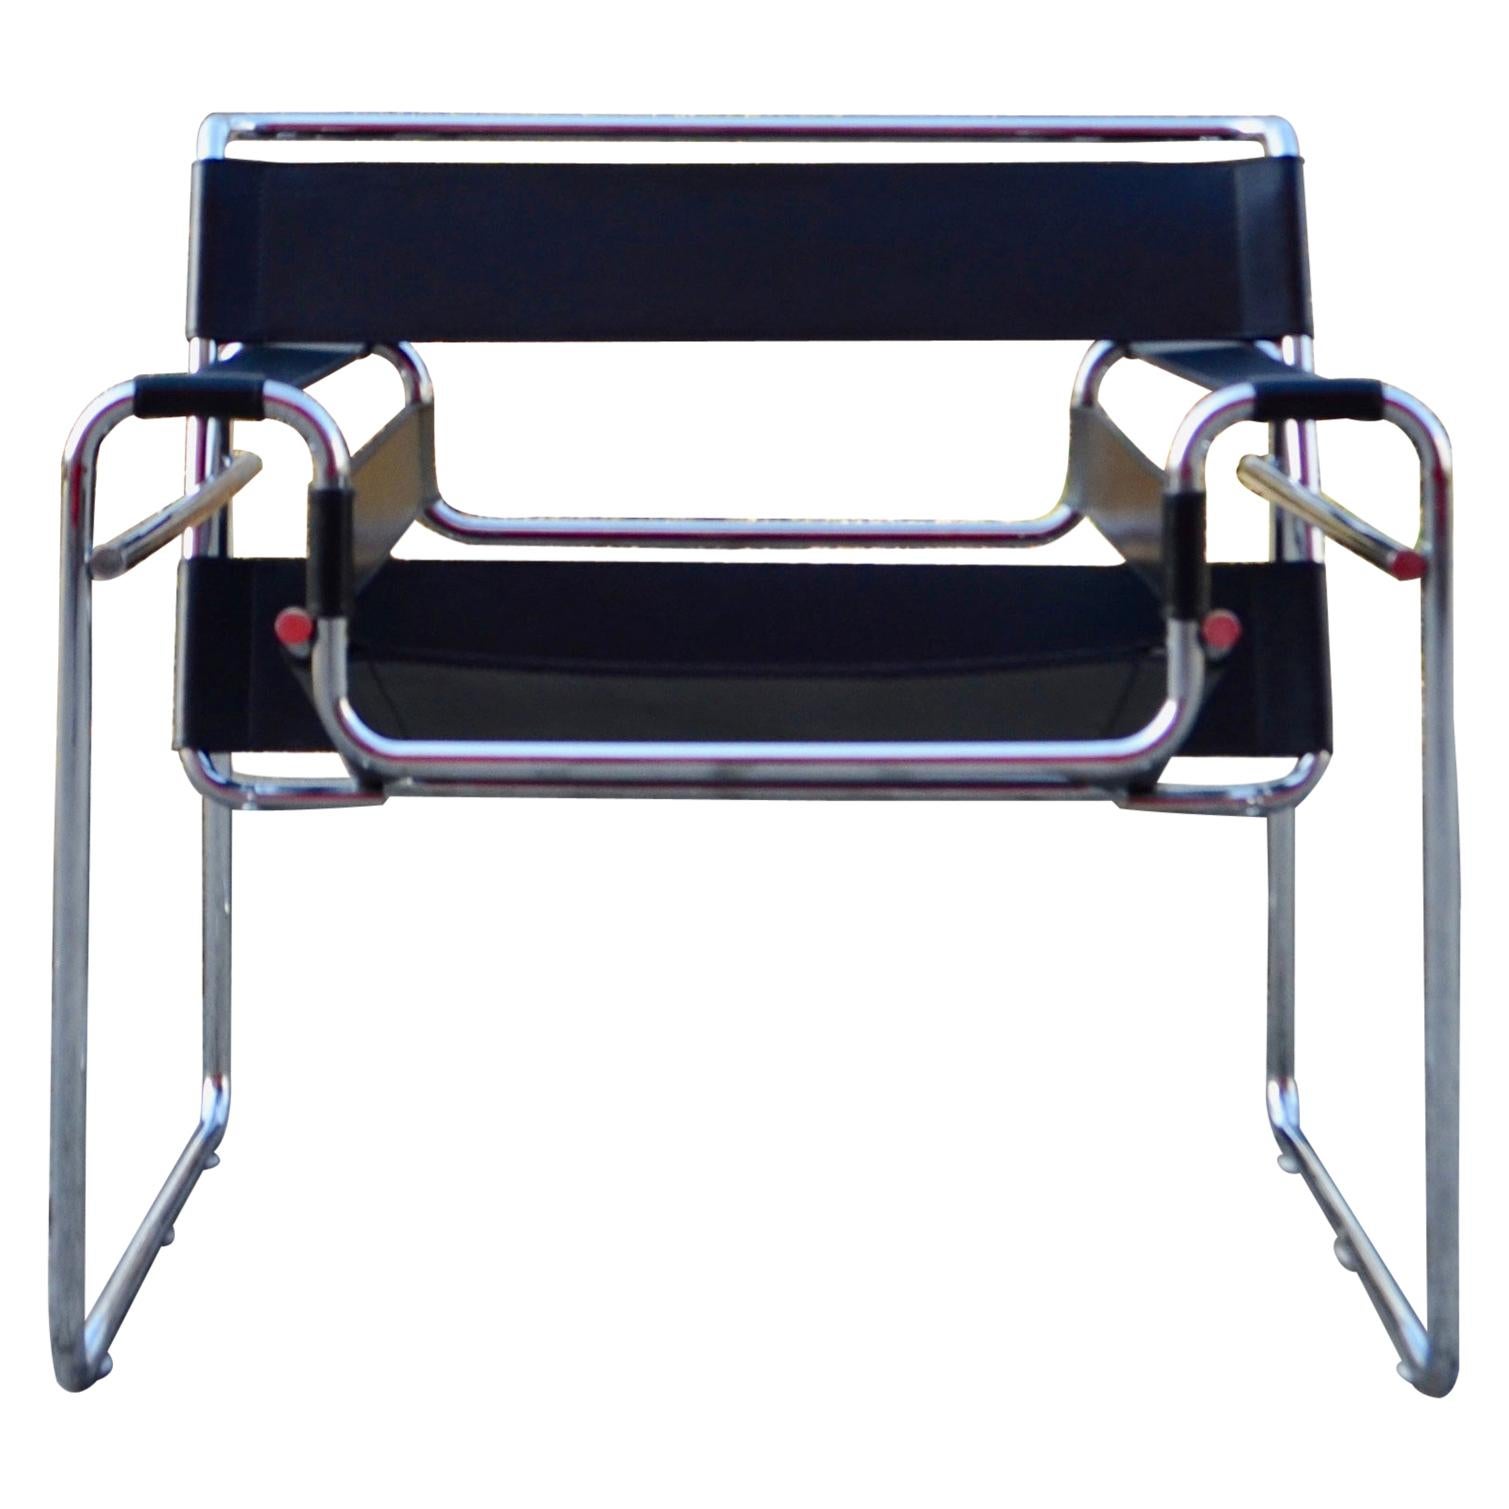 Knoll International Wassily Chair by Marcel Breuer Black Leather